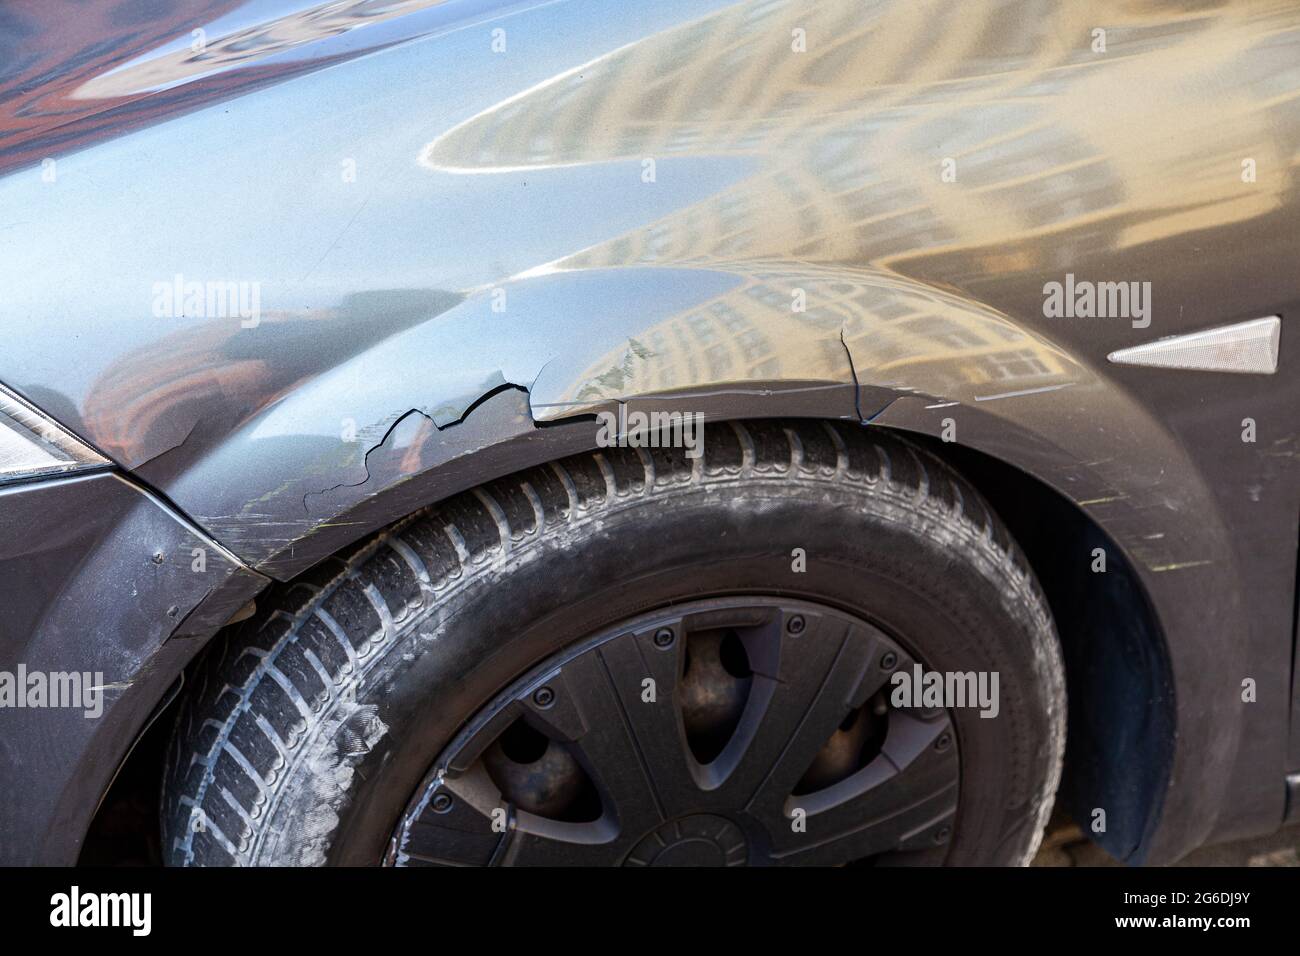 https://c8.alamy.com/comp/2G6DJ9Y/closeup-of-side-part-of-auto-wheel-and-fender-with-cracks-dents-and-scratches-after-road-accident-broken-vehicle-with-destroyed-auto-body-outdoor-s-2G6DJ9Y.jpg